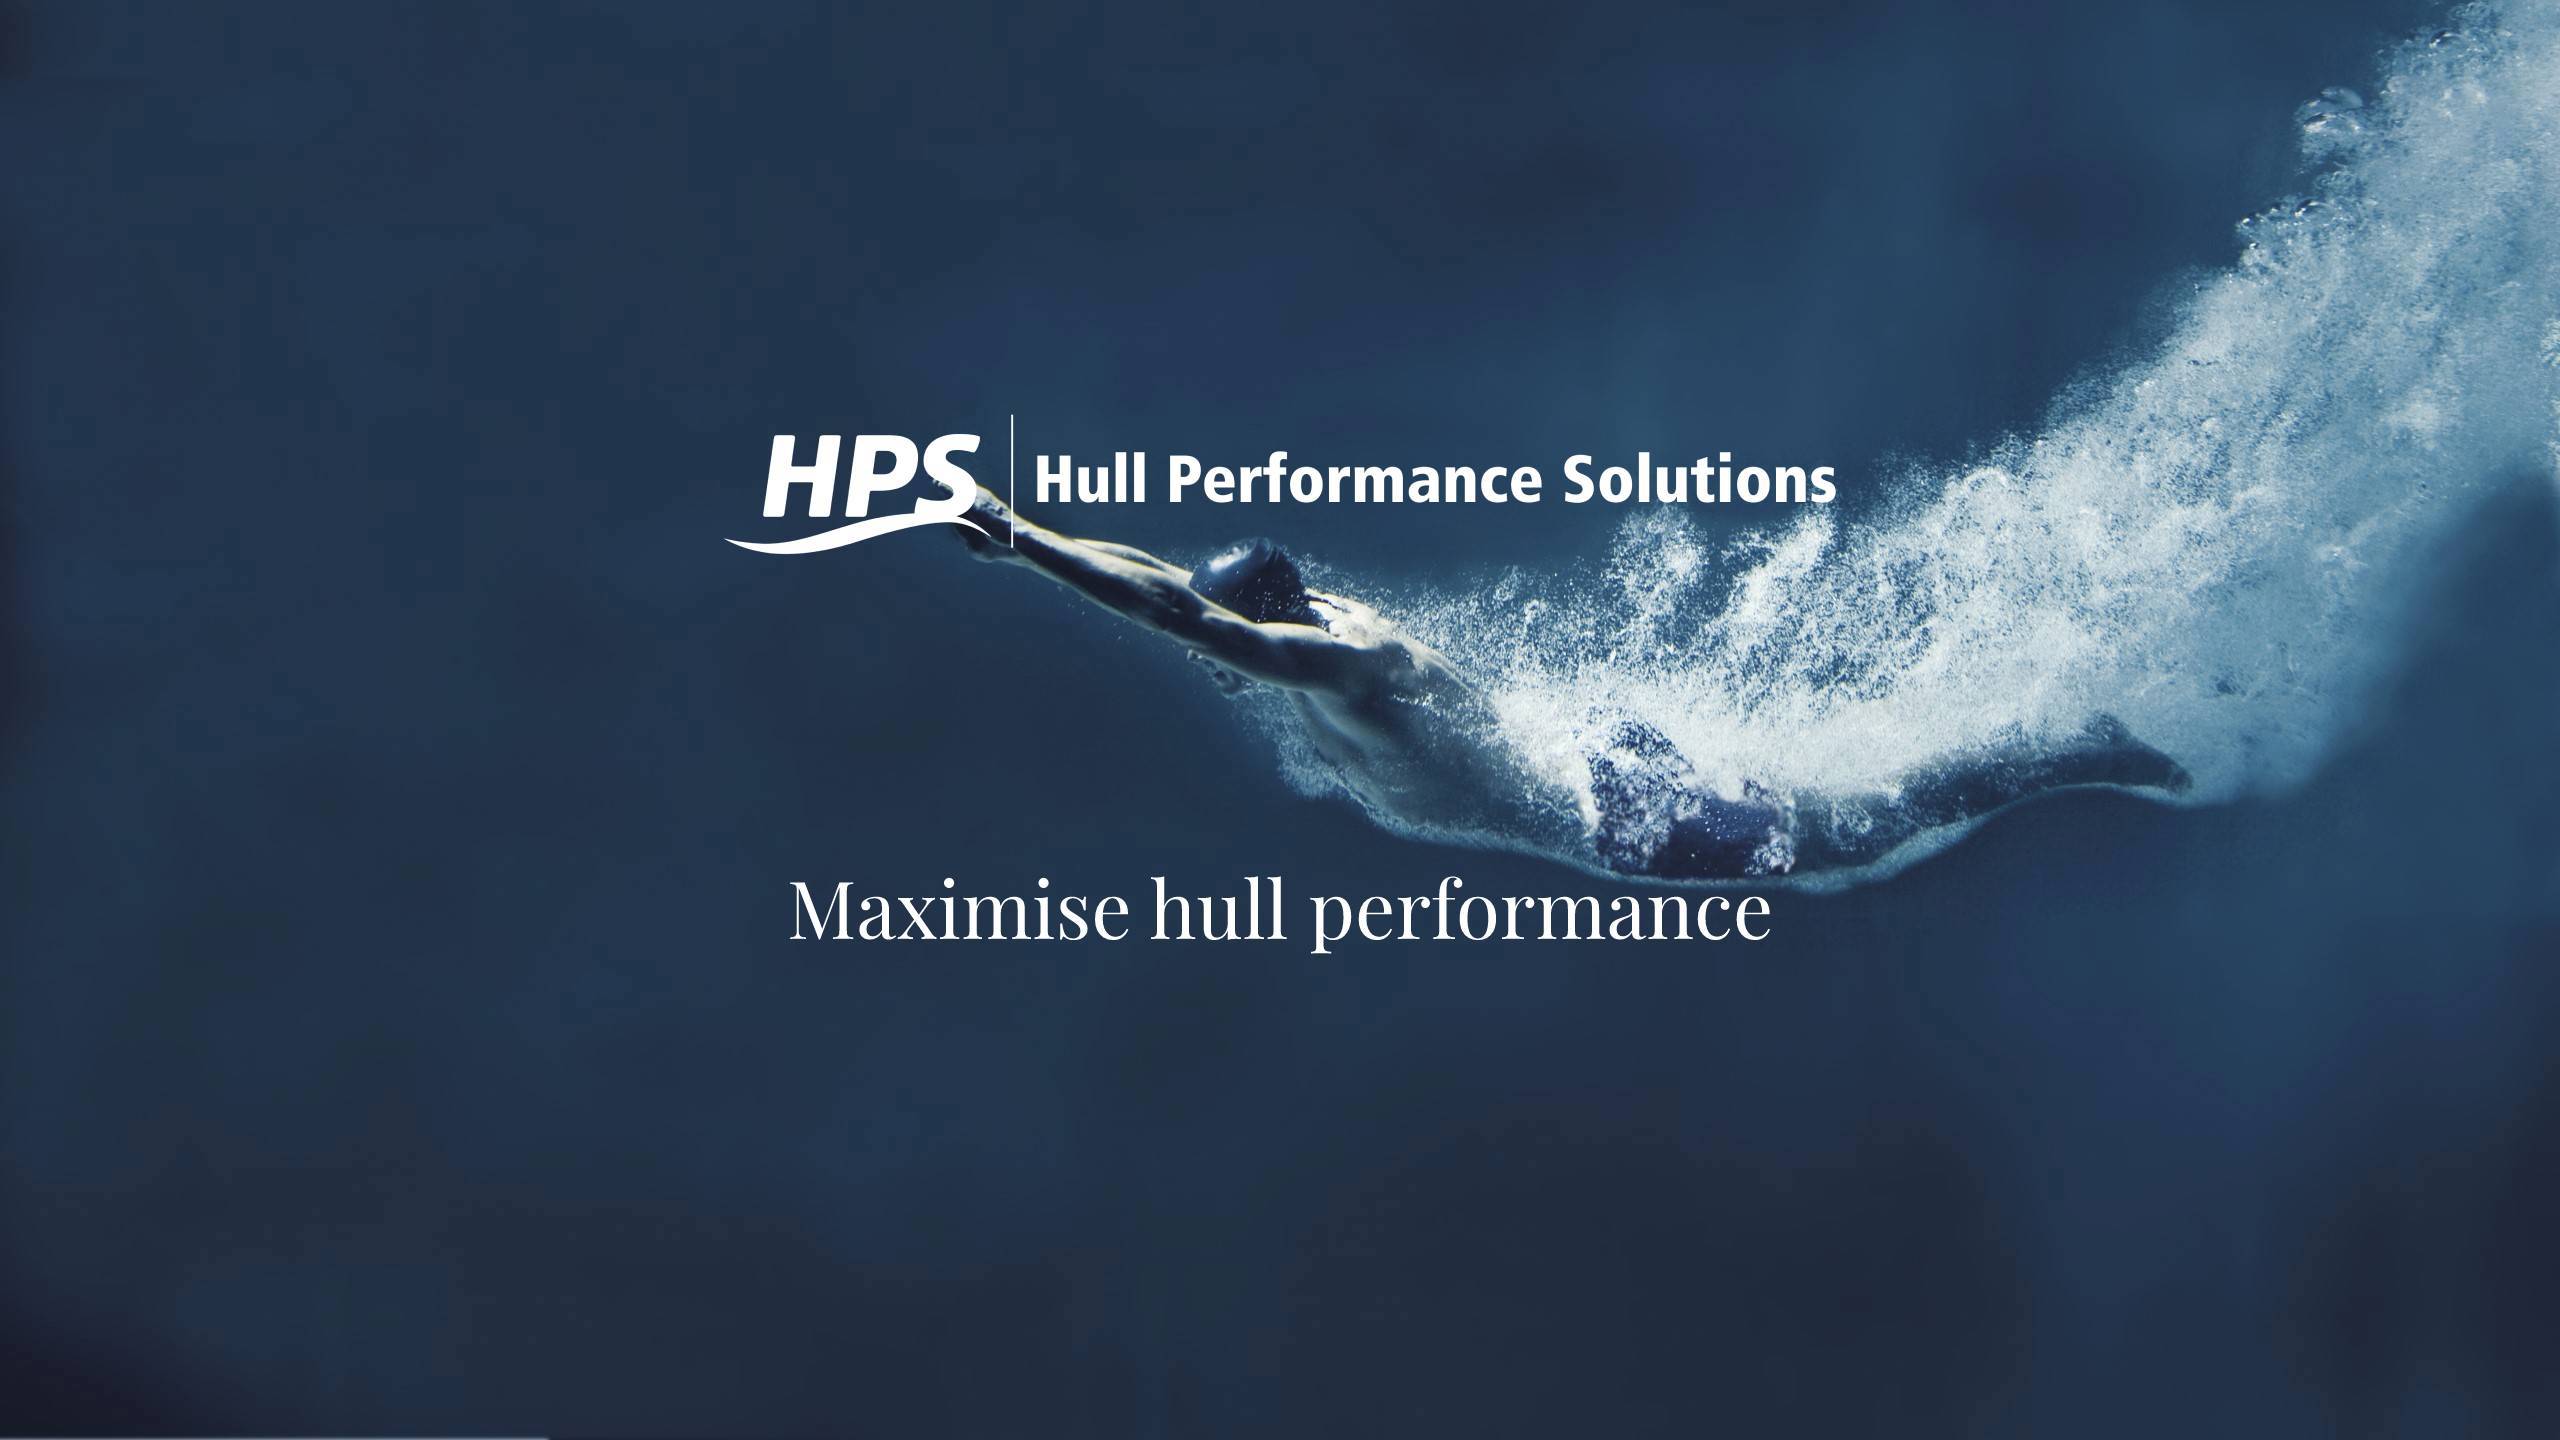 HPS header with logo and text